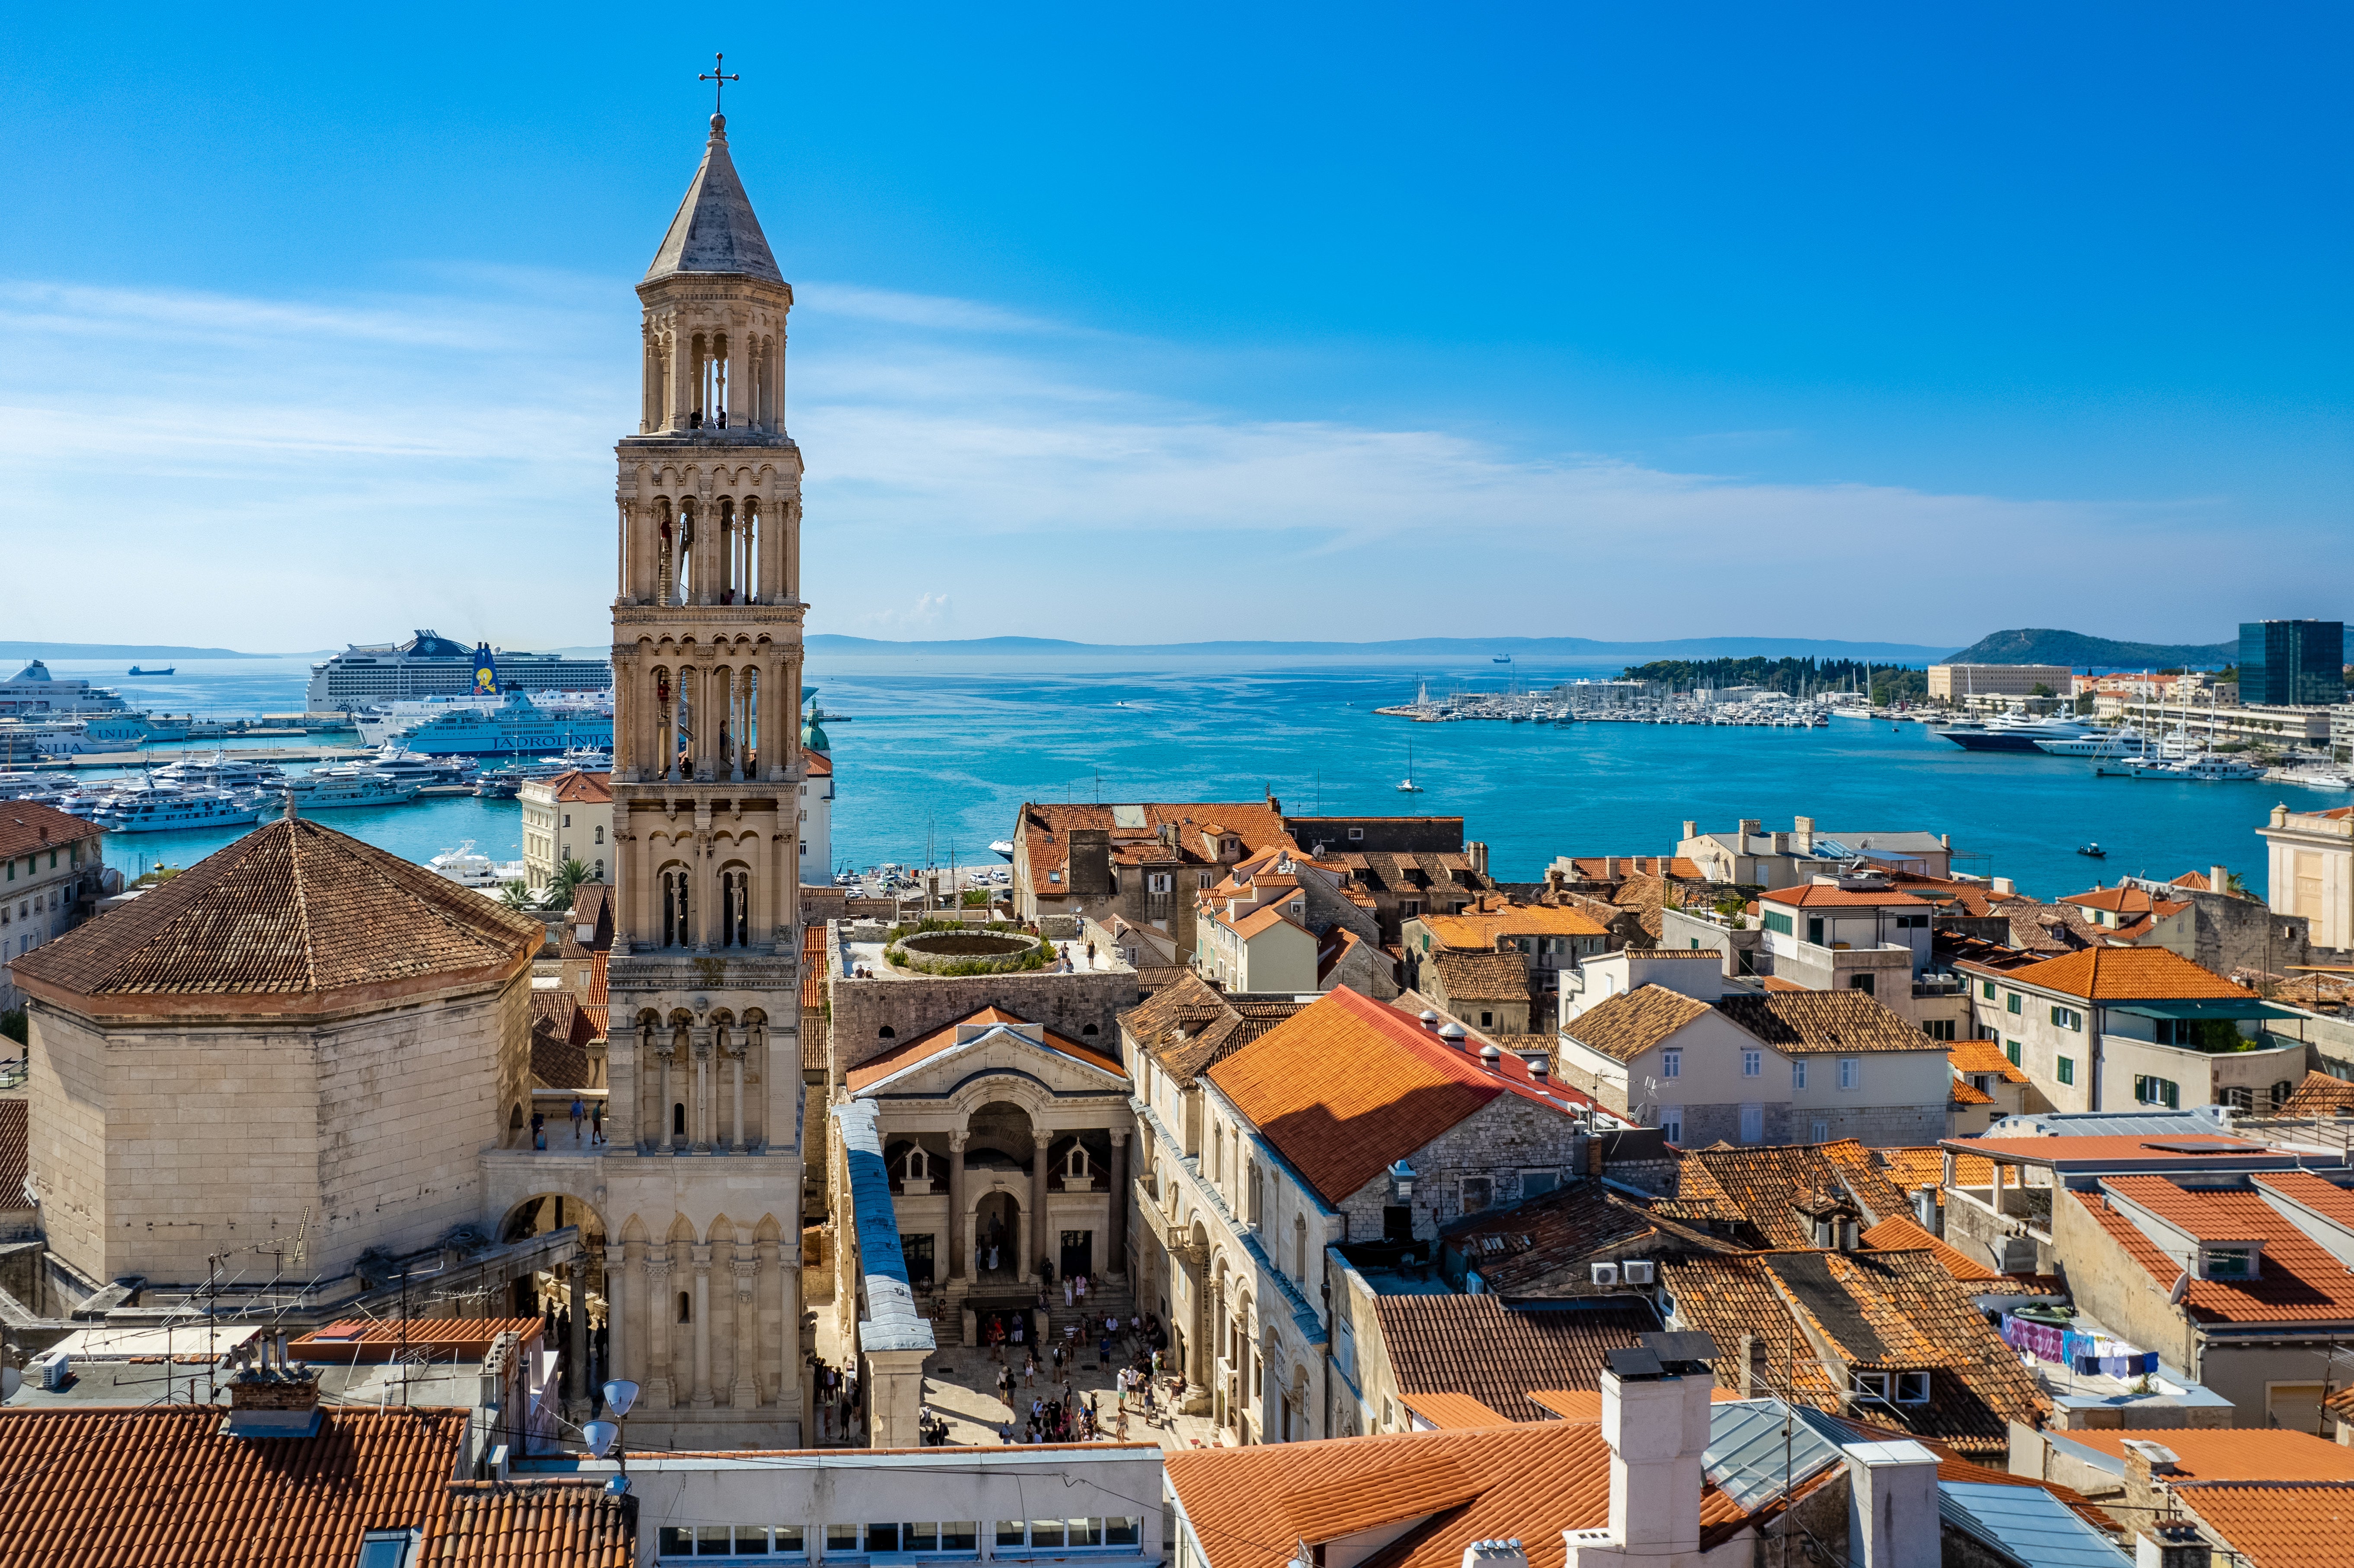 From incredible history to compelling culture and natural beauty, Split has it all